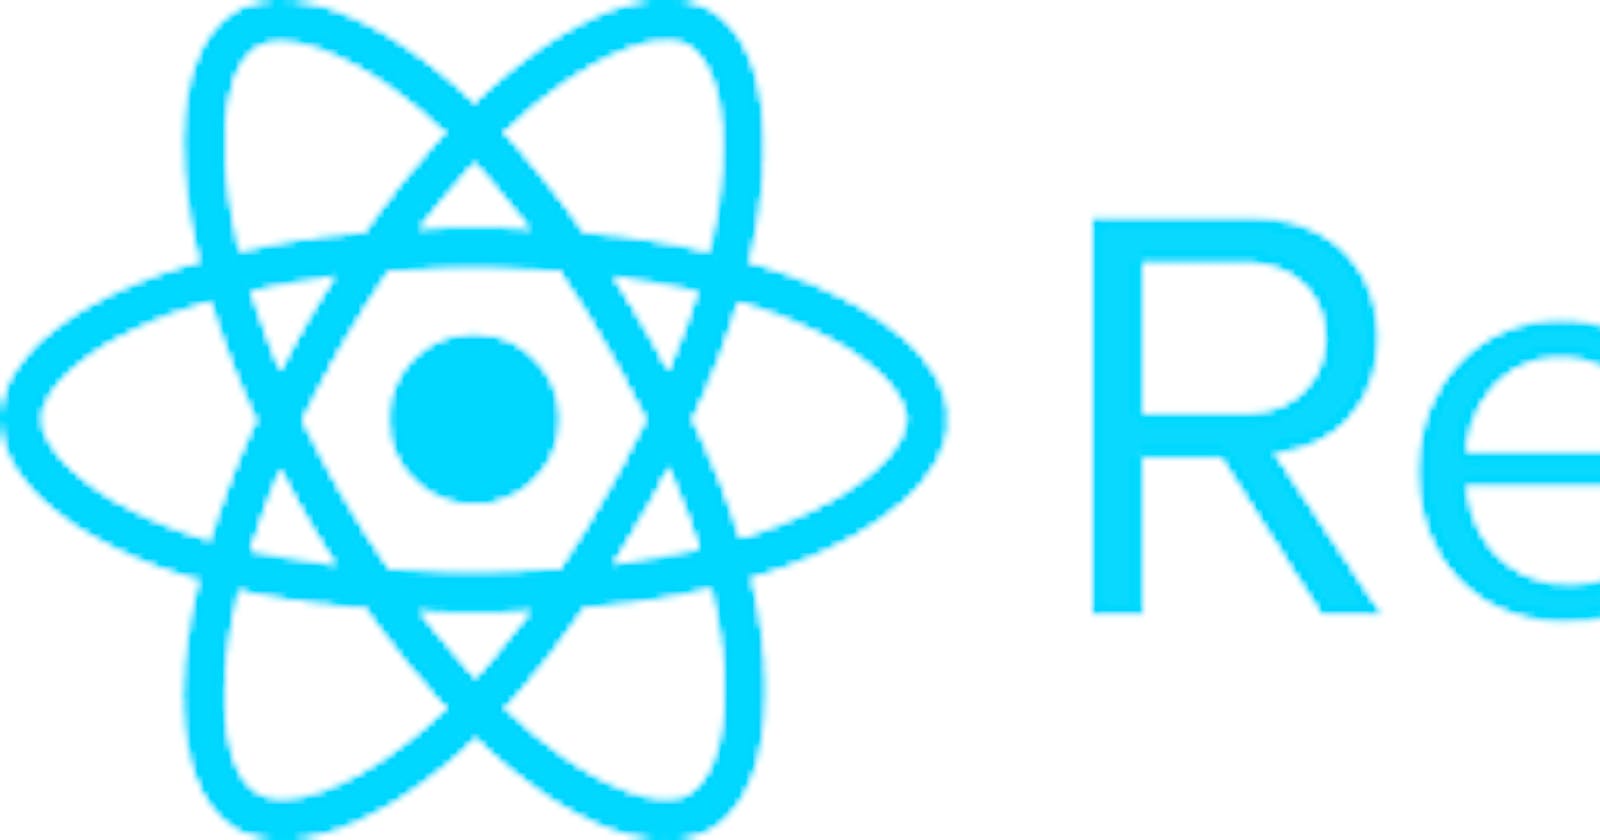 Create your first React App on a Windows PC